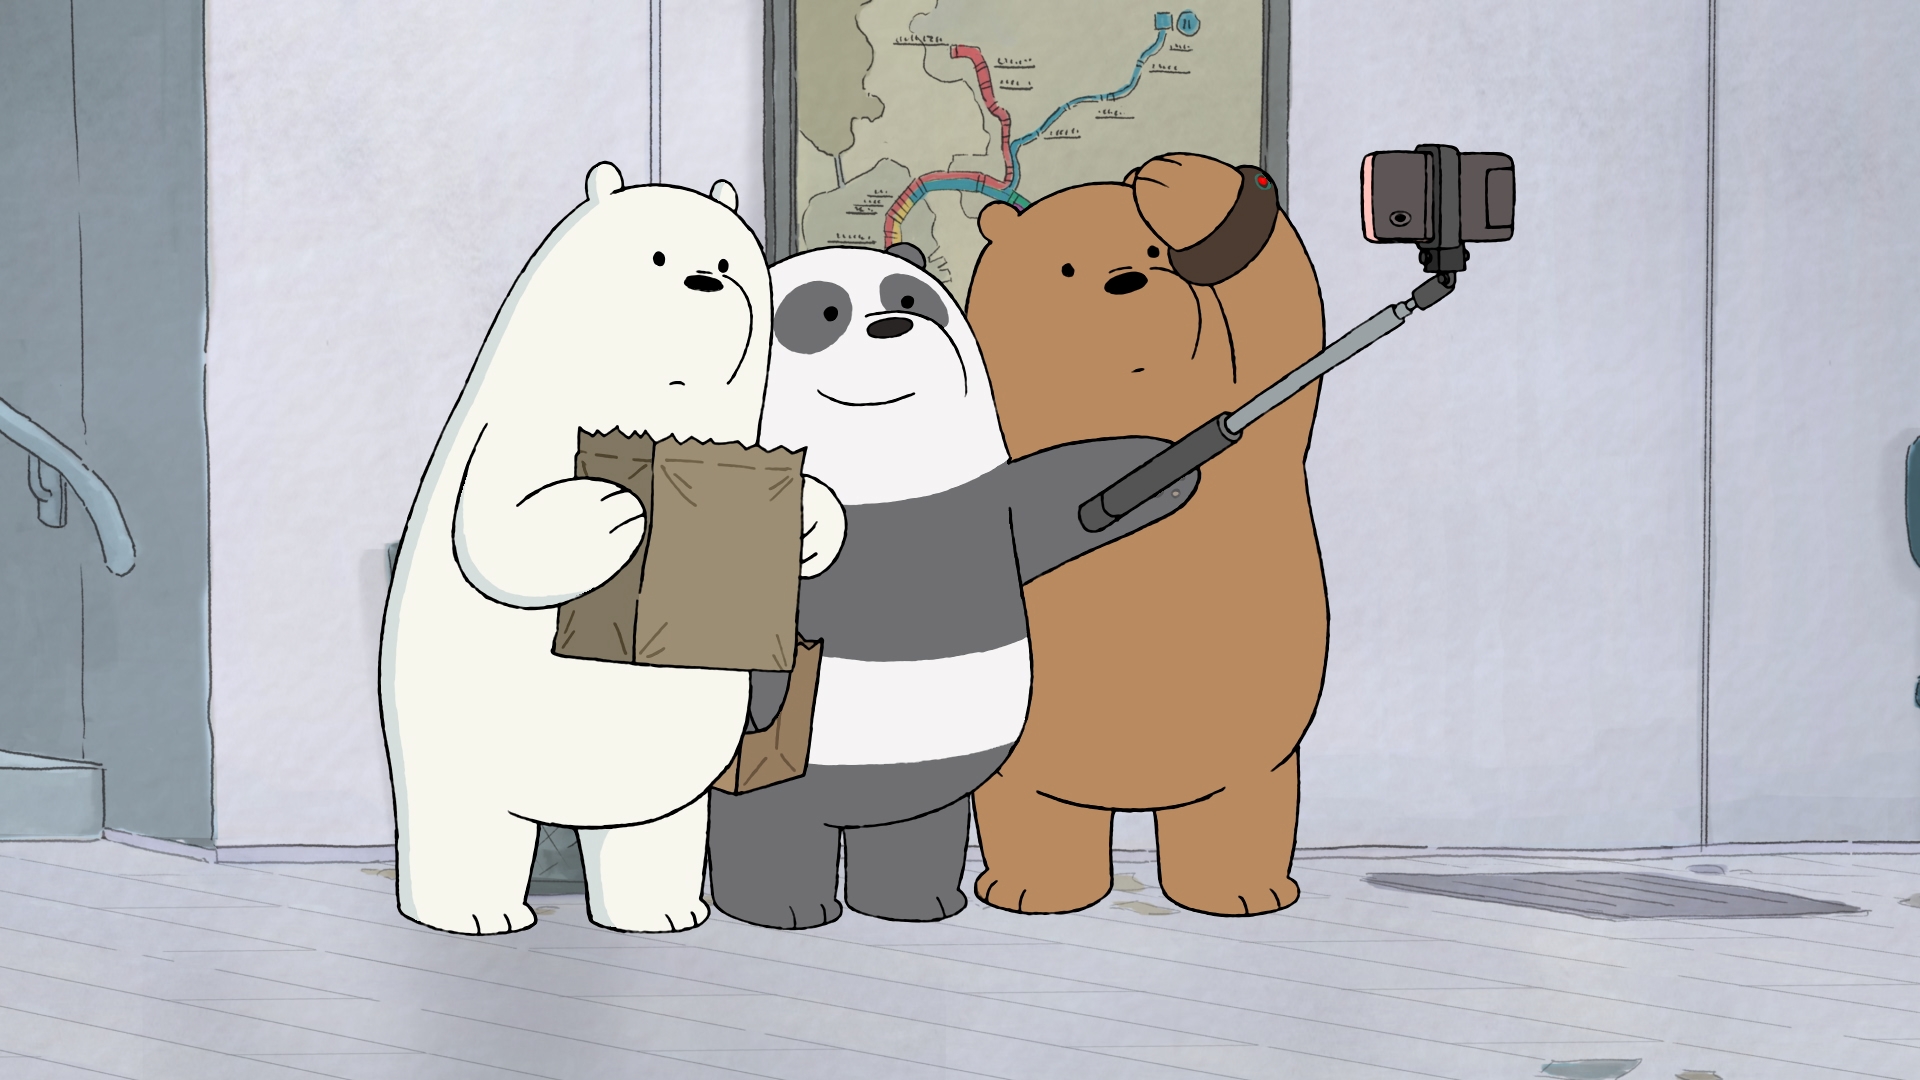 We Bare Bears Getting Tv Movie Treatment Potential Spinoff